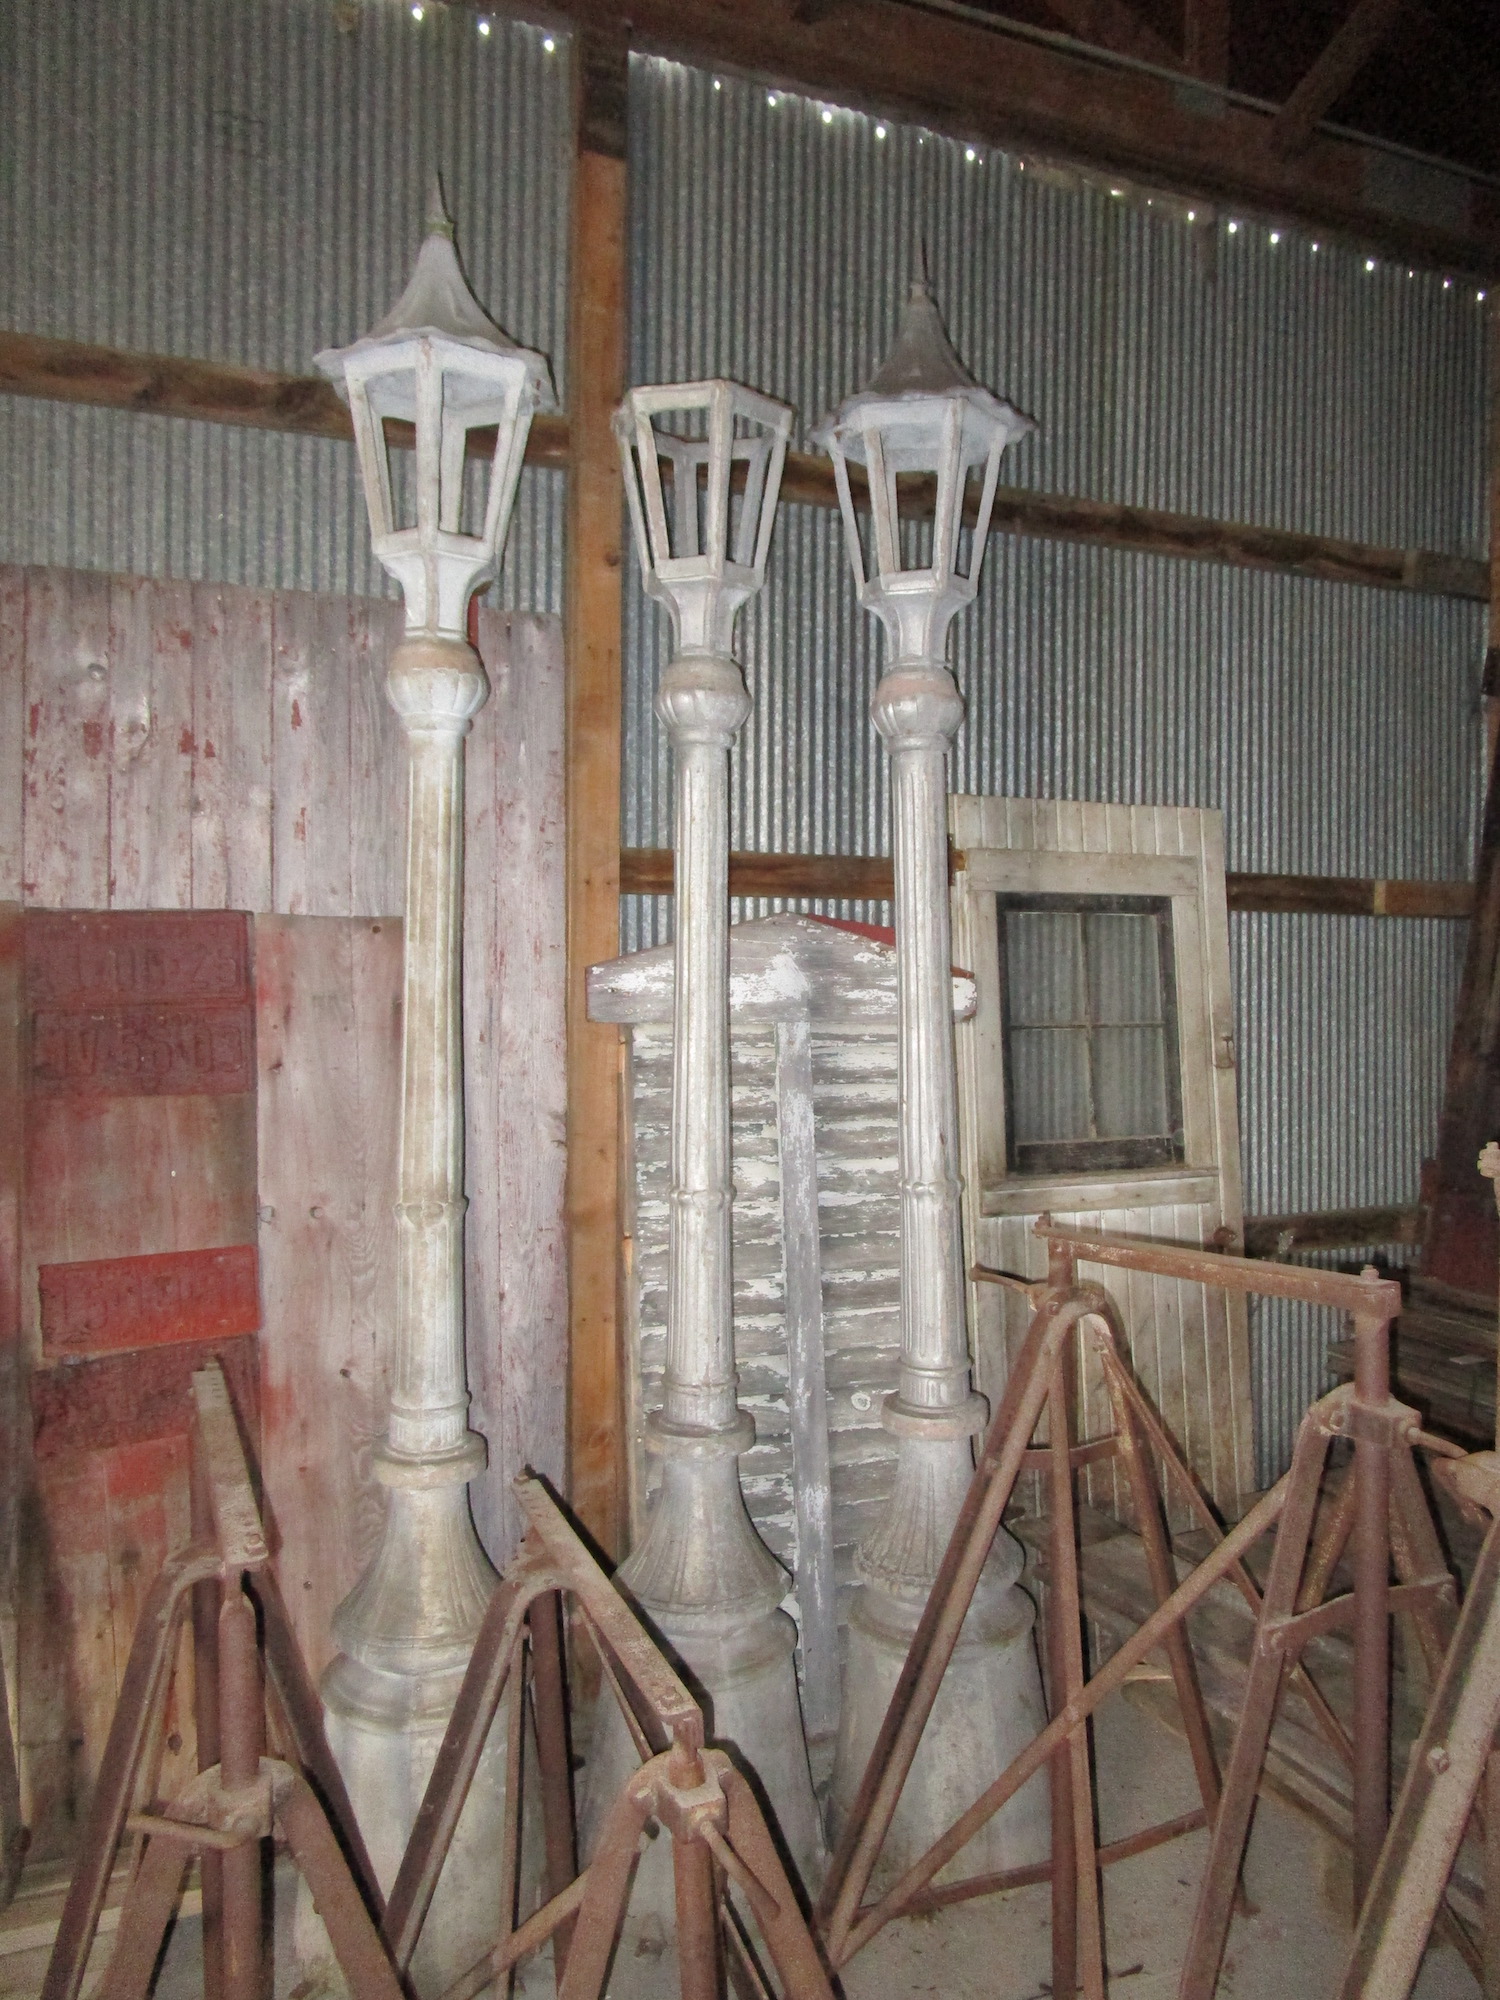 A few antique, white streetlights lined up in a warehouse